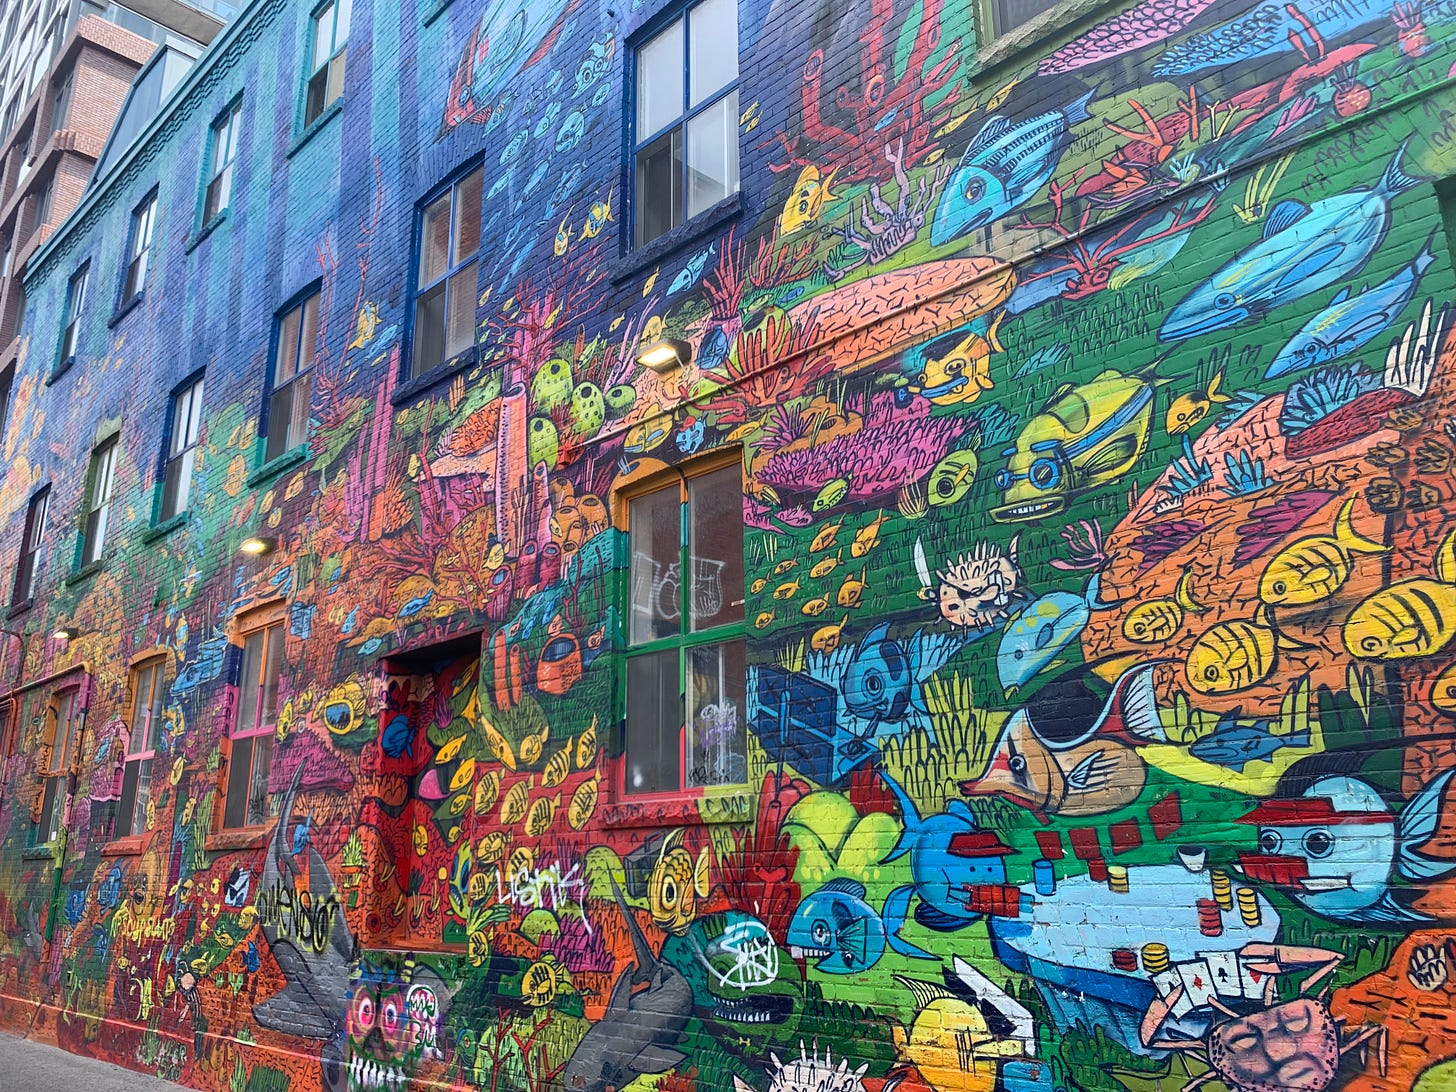 A colourful mural with a variety of cartoon fish and coral in bright yellow, orange, green, and pink, some swimming and others doing various human things. The top of the image transitions into a variety of blue hues.